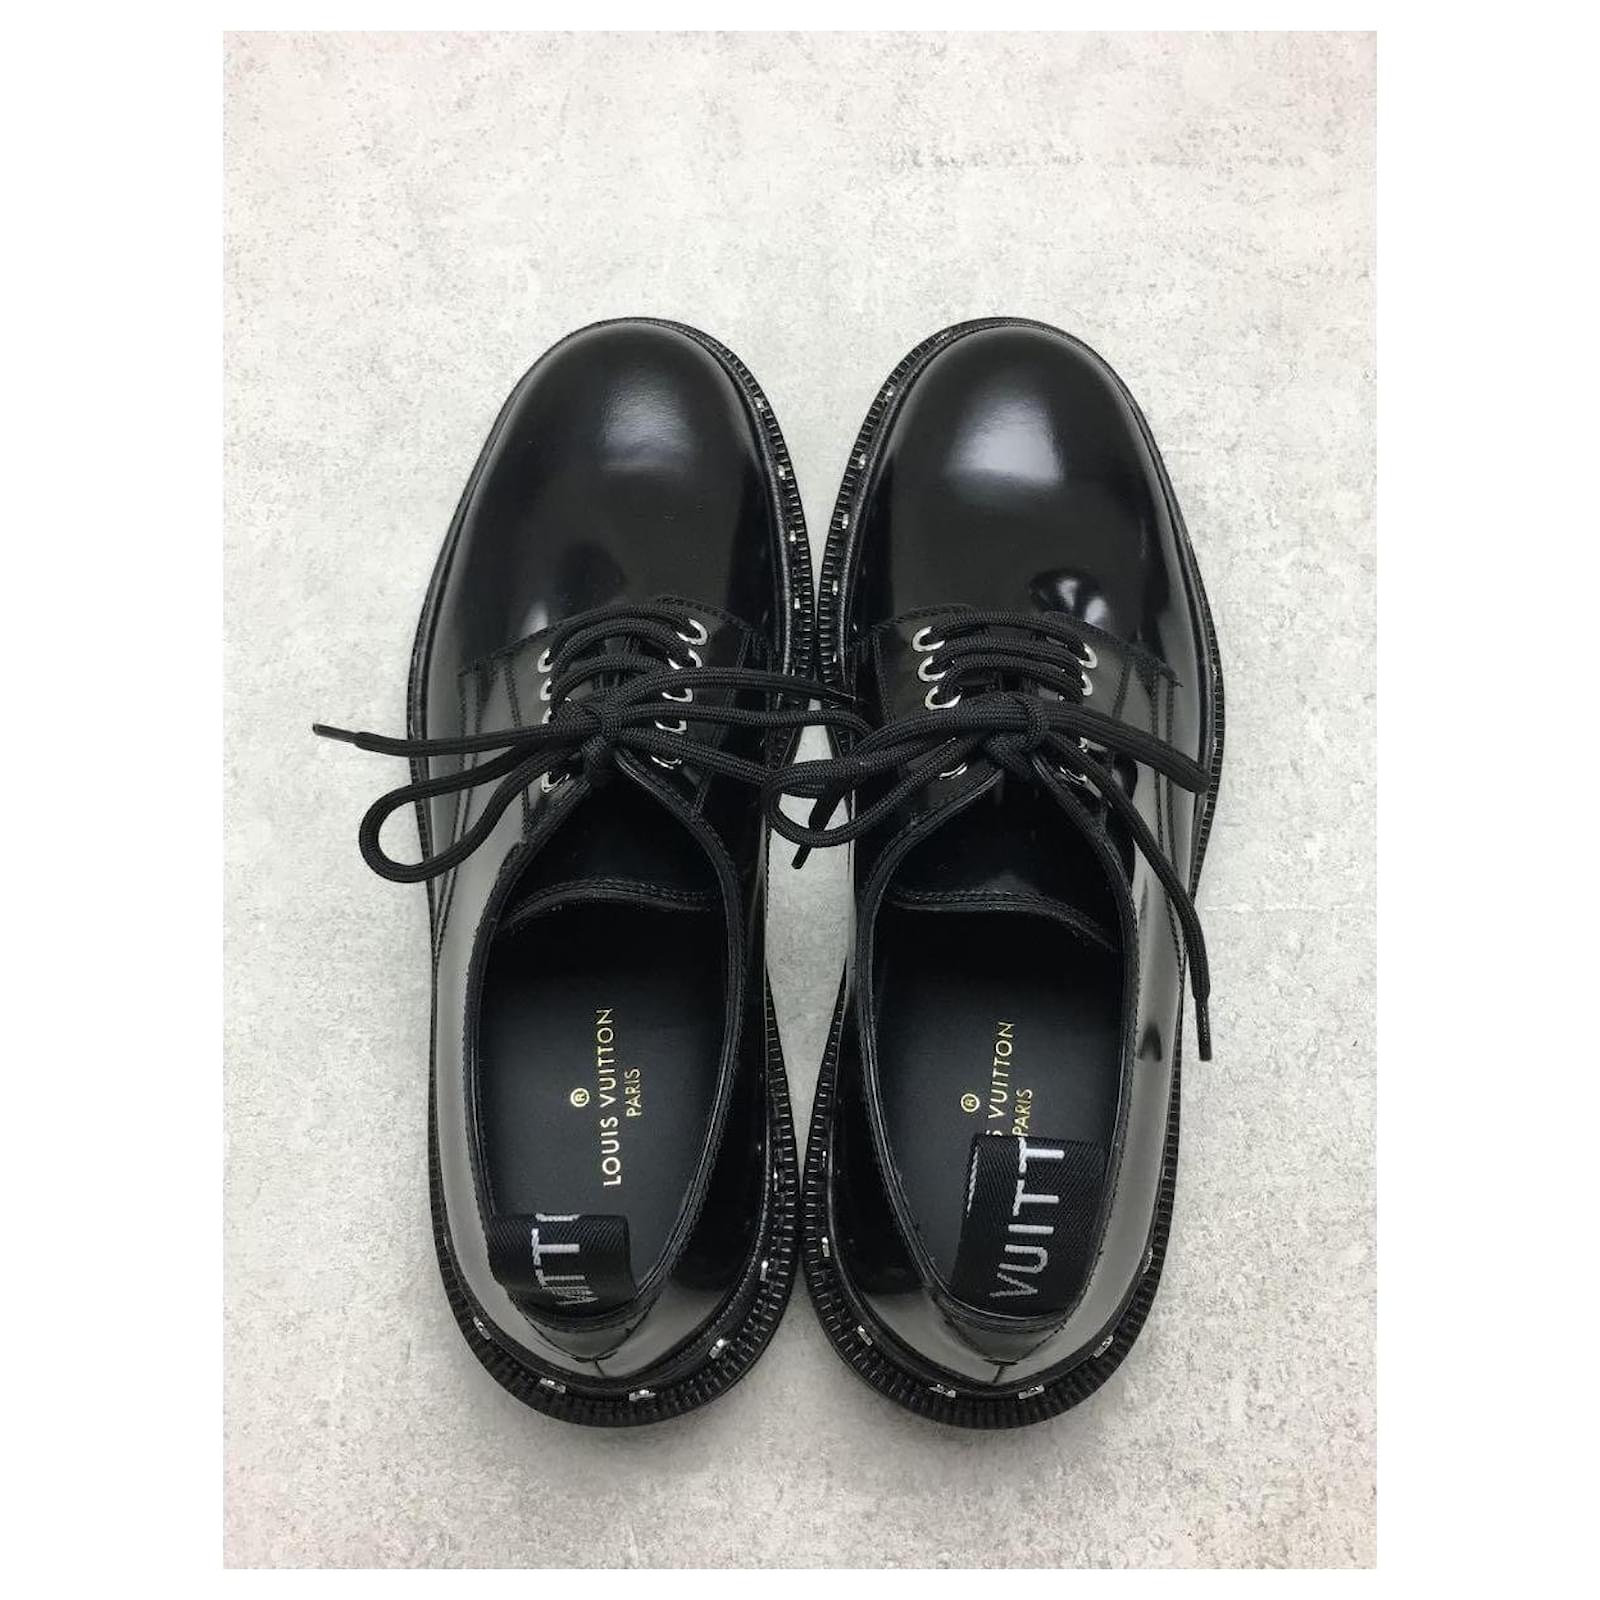 Buy Louis Vuitton LOUISVUITTON Size: 8 LV Black Ice Line Monogram Derby  Shoes from Japan - Buy authentic Plus exclusive items from Japan